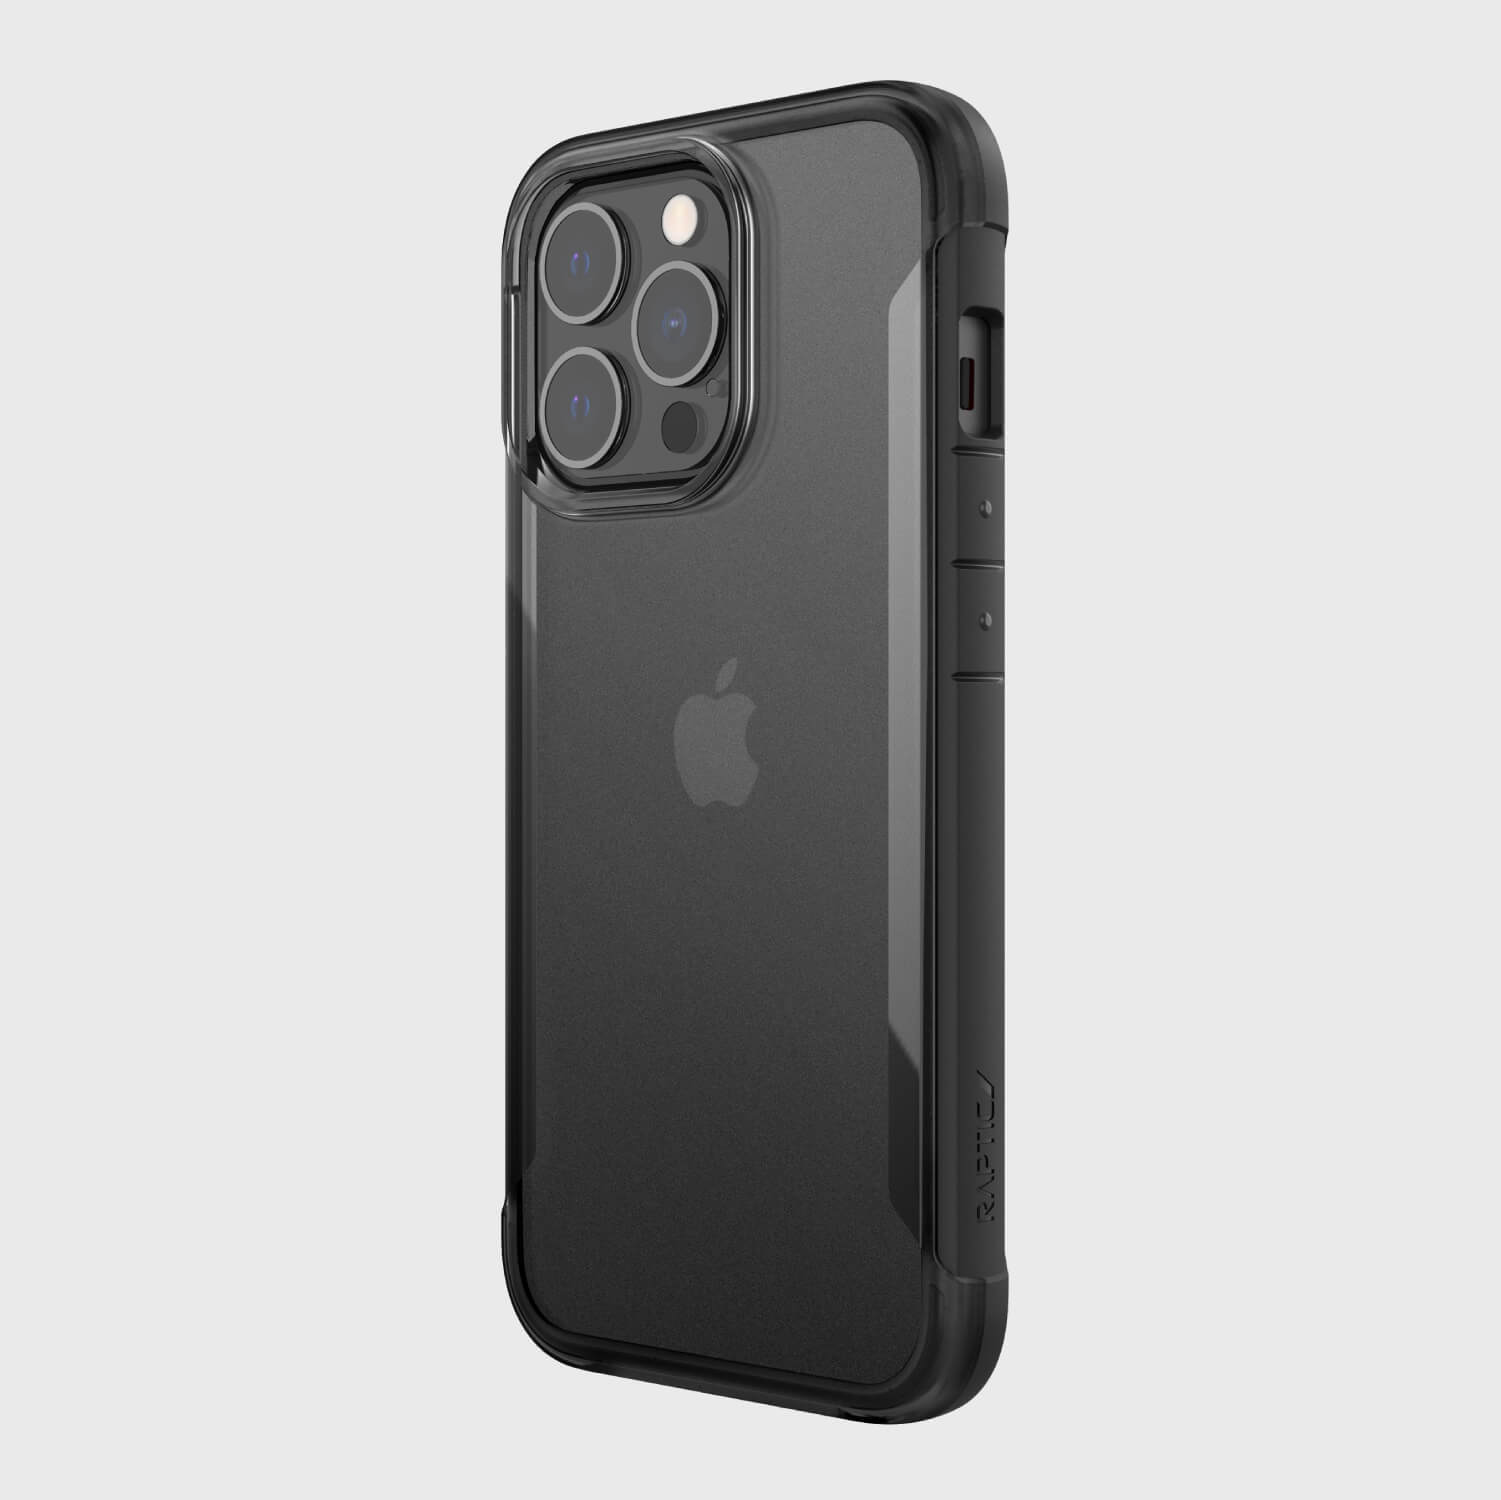 Showing an iPhone 13 Pro max in a black Raptic Terrain case